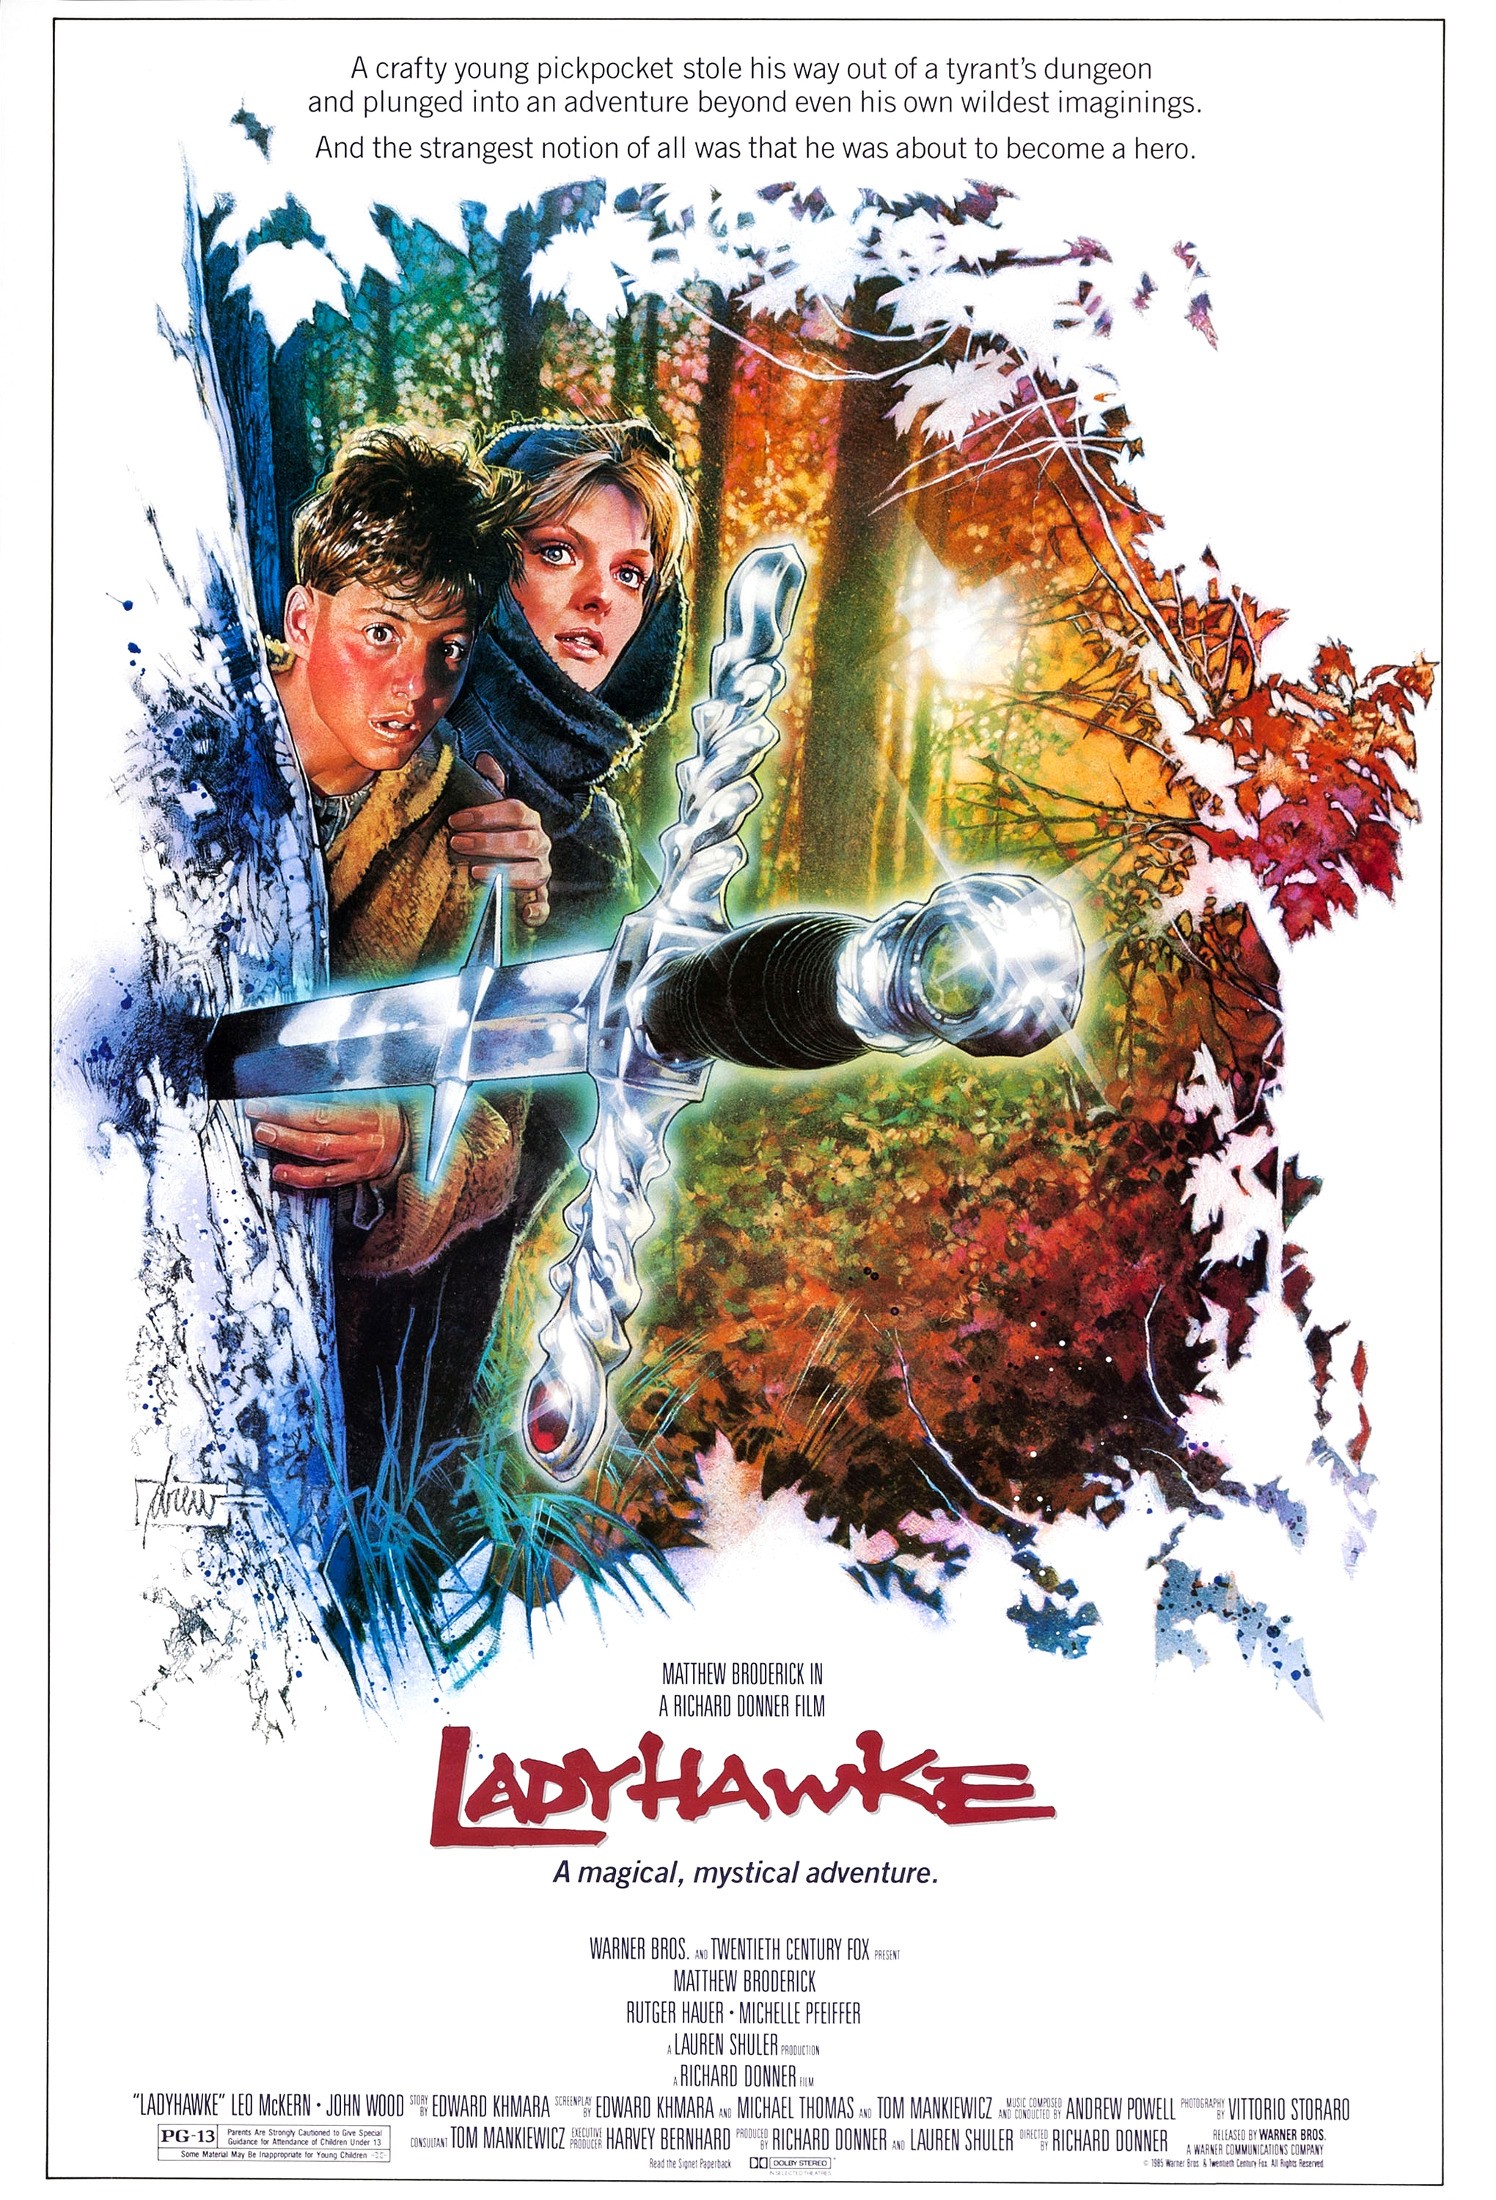 ladyhawke soundtrack - A crafty young pipocket stoleway out of standur and pled into adventure beyond even his own wildest maprings And the strongest notion of al was that he was about to become a hem 2 . W W Ady Hawke A magical mystical adventure . . Twi